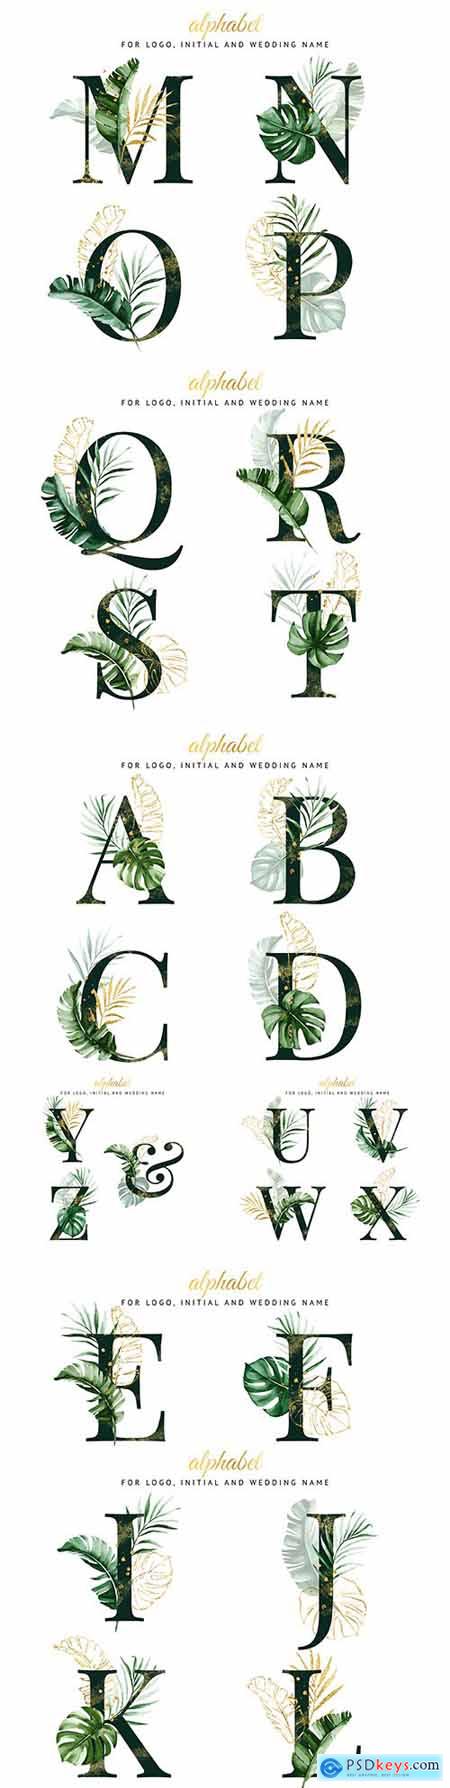 Decorative alphabet with tropical leaves for inviting design